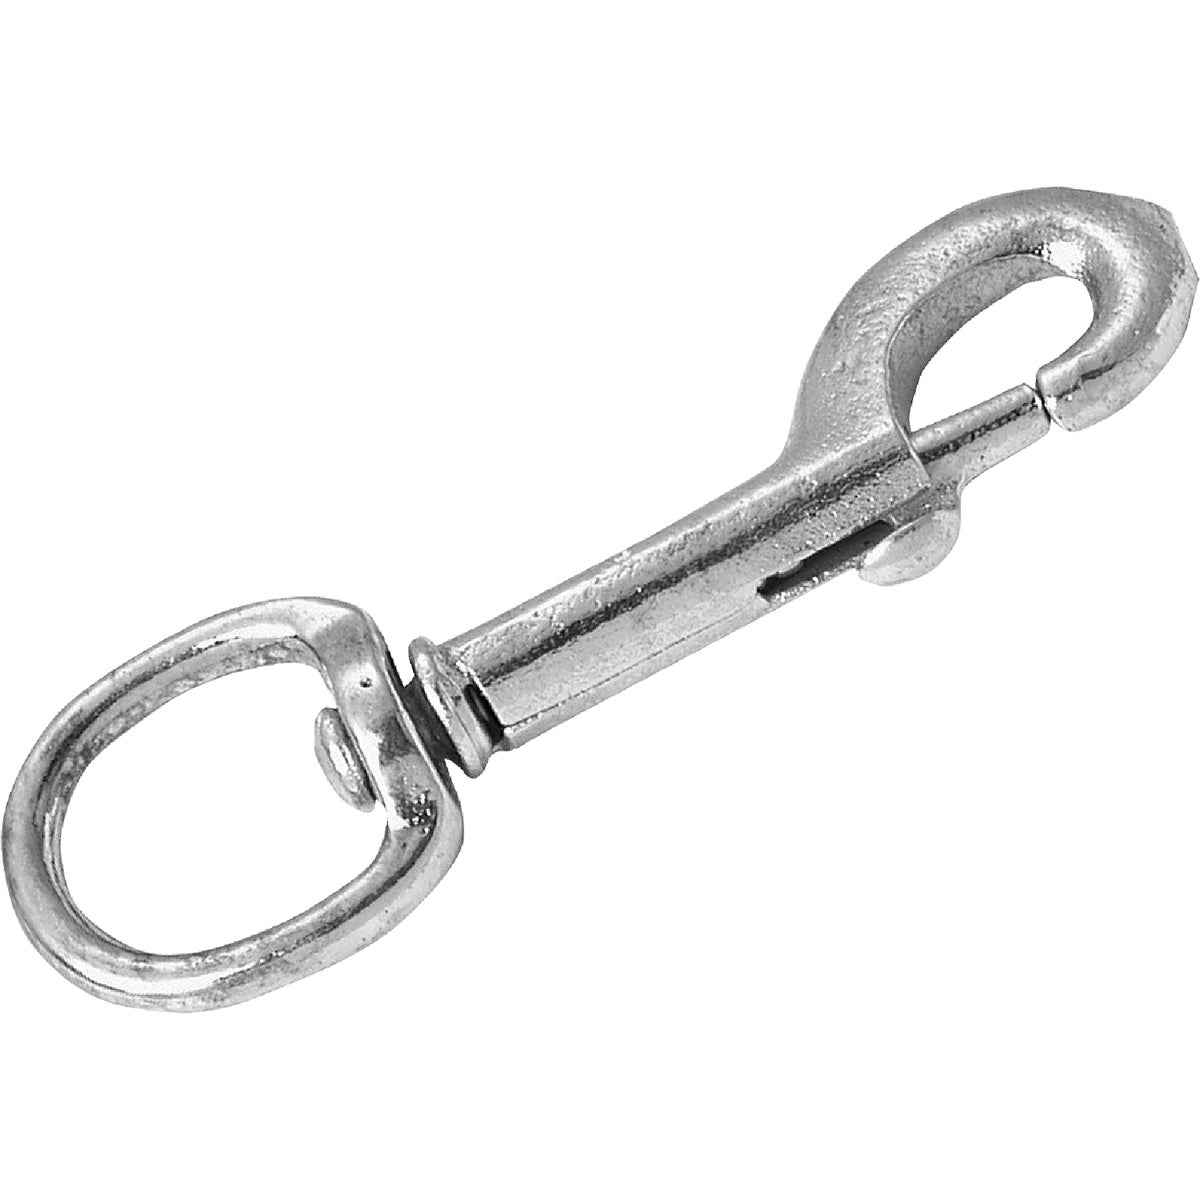 Item 769334, Swivel round eye bolt snap ideal for a wide variety of applications.